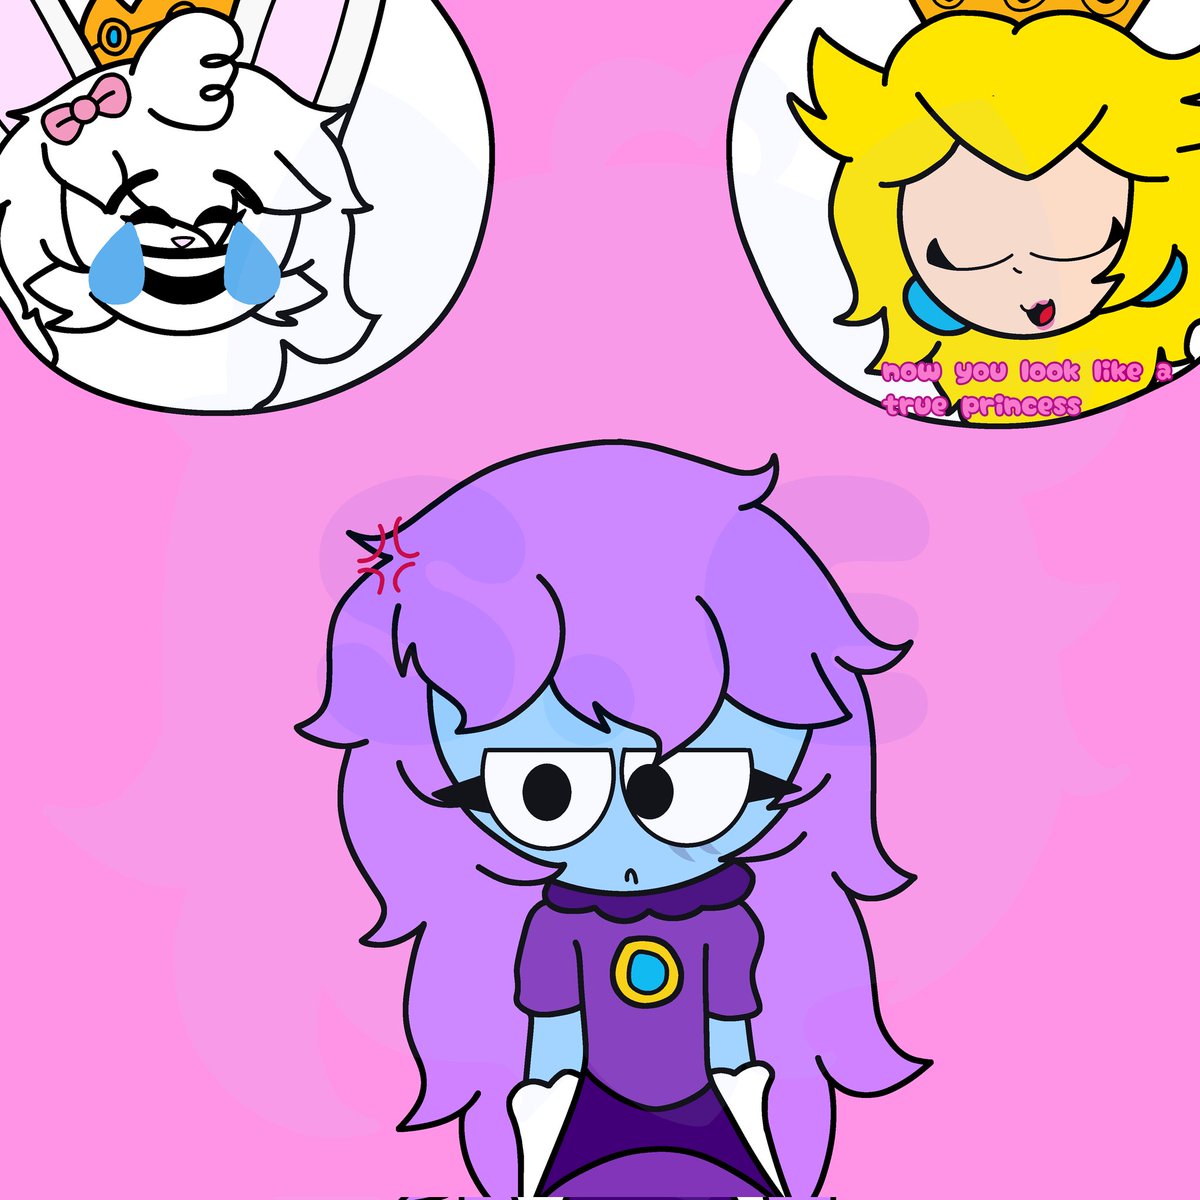 Some new art of my Pibby Mario AU

It was that one time Pibby went to Peach's castle to have a sleepover with Bonnie and the fluffybuns and Princess Peach decided to play dress up lol

Safe to confirmed Pibby is not a fan of dresses (100% tomboy)

#Pibby #LearningWithPibby